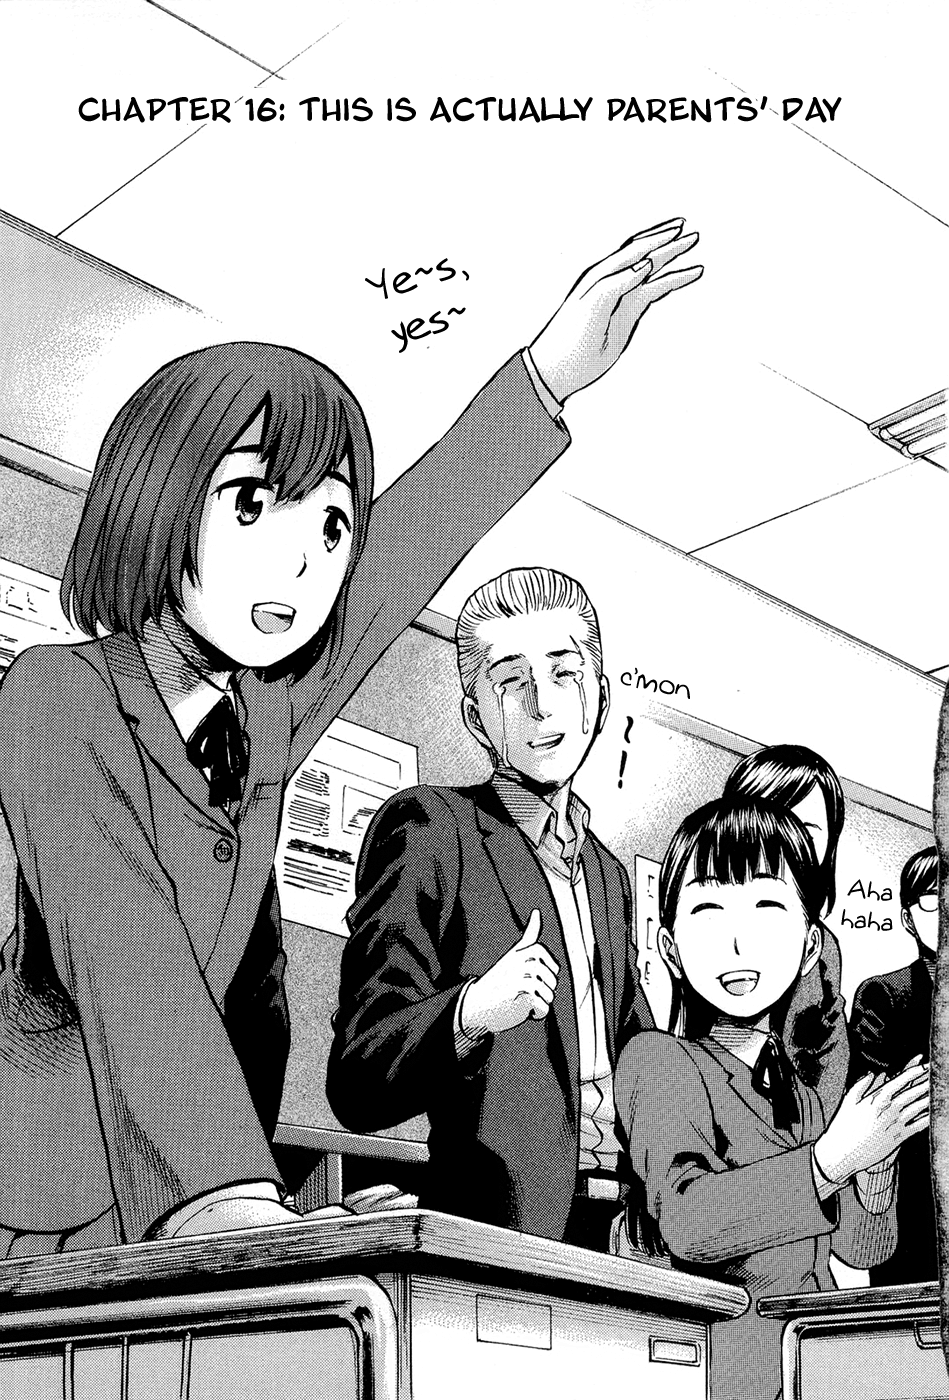 Hinamatsuri Vol.3-Chapter.16-This-is-Actually-Parents'-Day Image